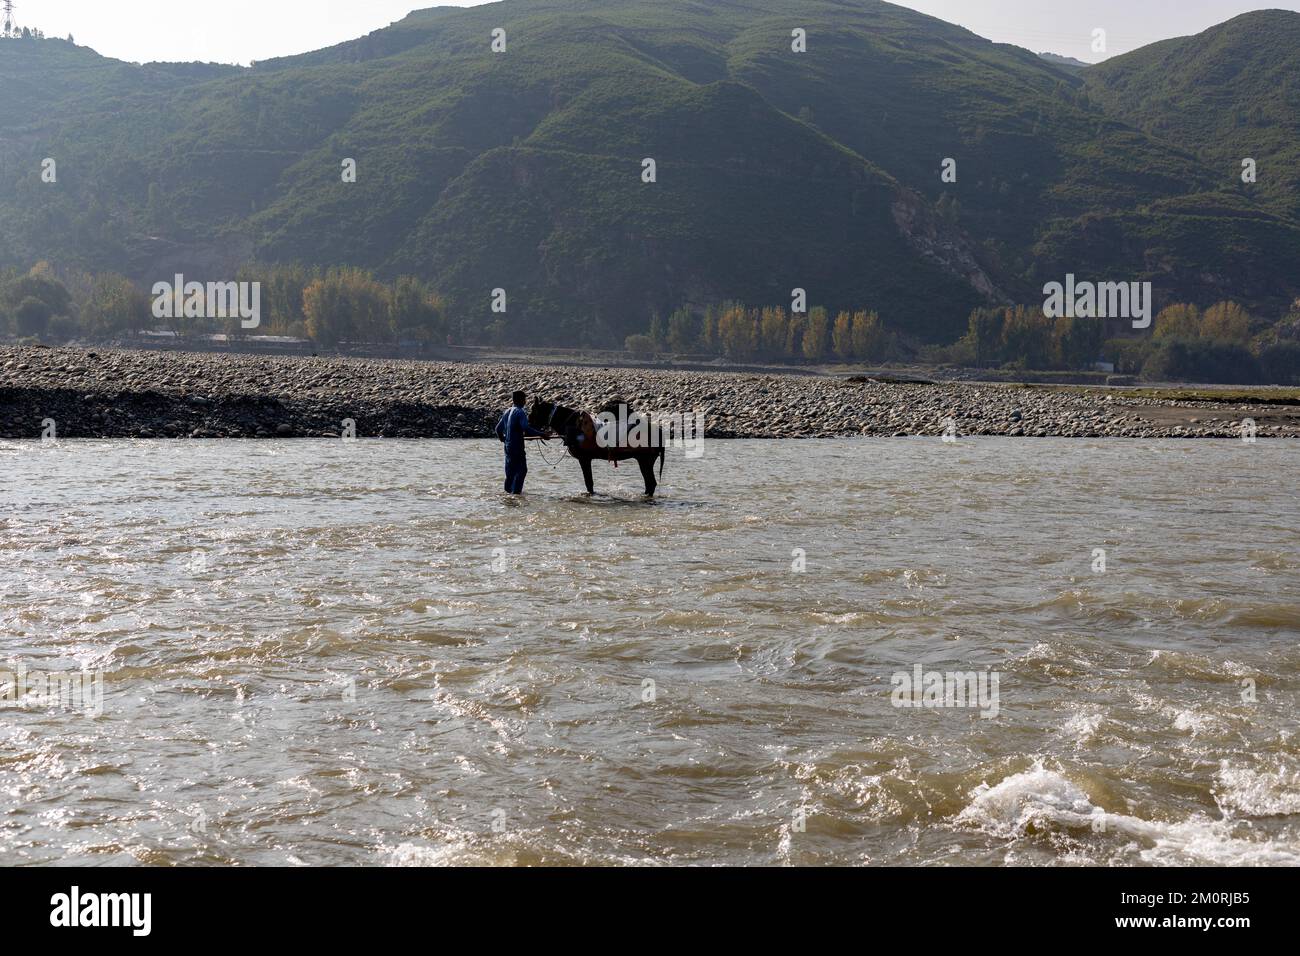 Bringing river sand from the middle of the river flowing water on the back of a horse for construction uses Stock Photo